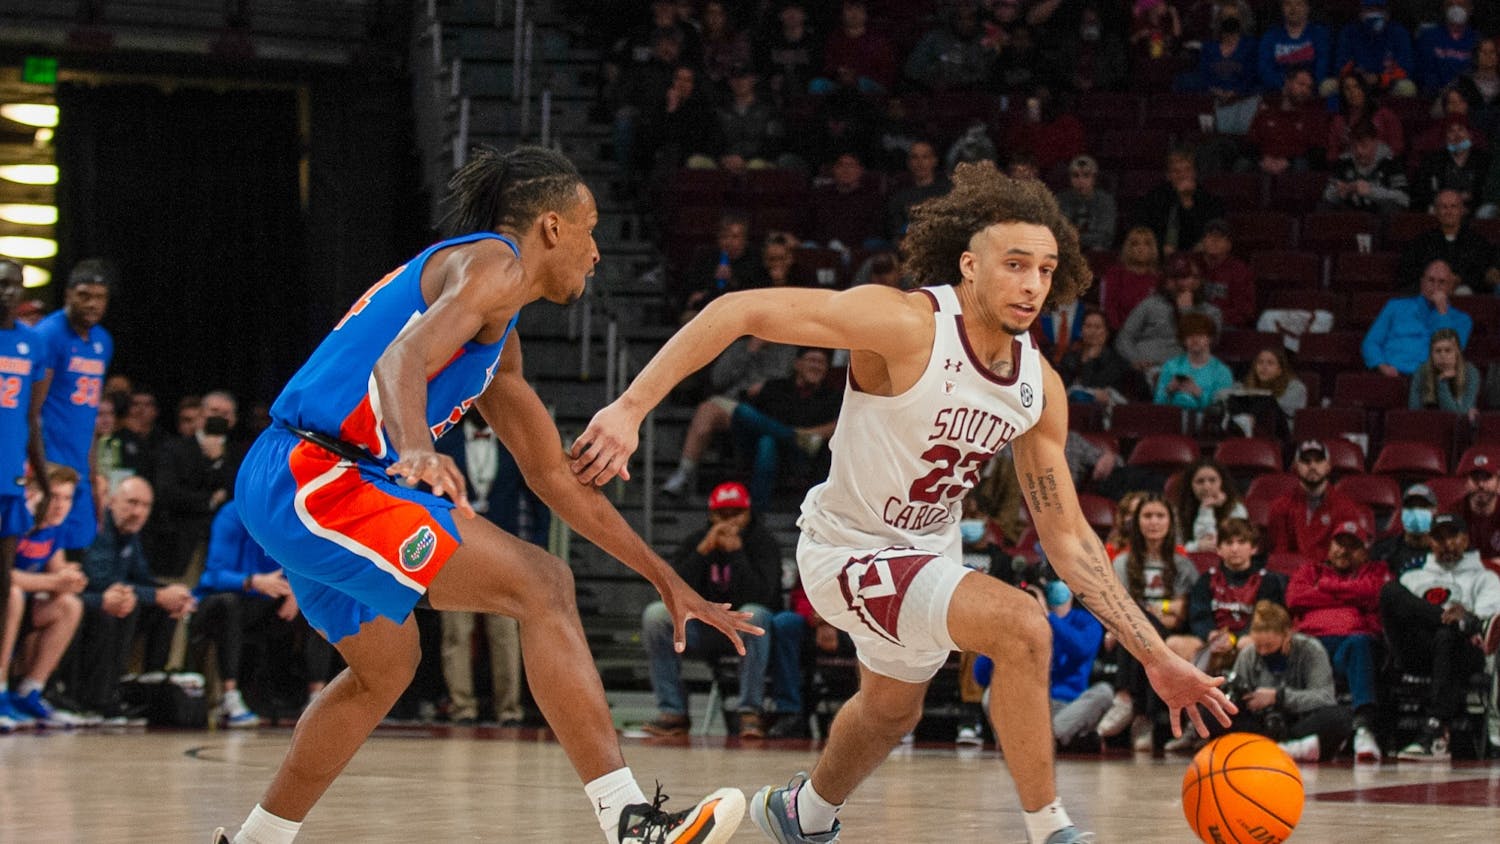 Freshman guard Devin Carter dribbles the ball around the defense in a conference game against the Florida Gators on Saturday, Jan. 15, 2021 in Columbia, SC. Carter played one of his best games of the season against Arkansas.